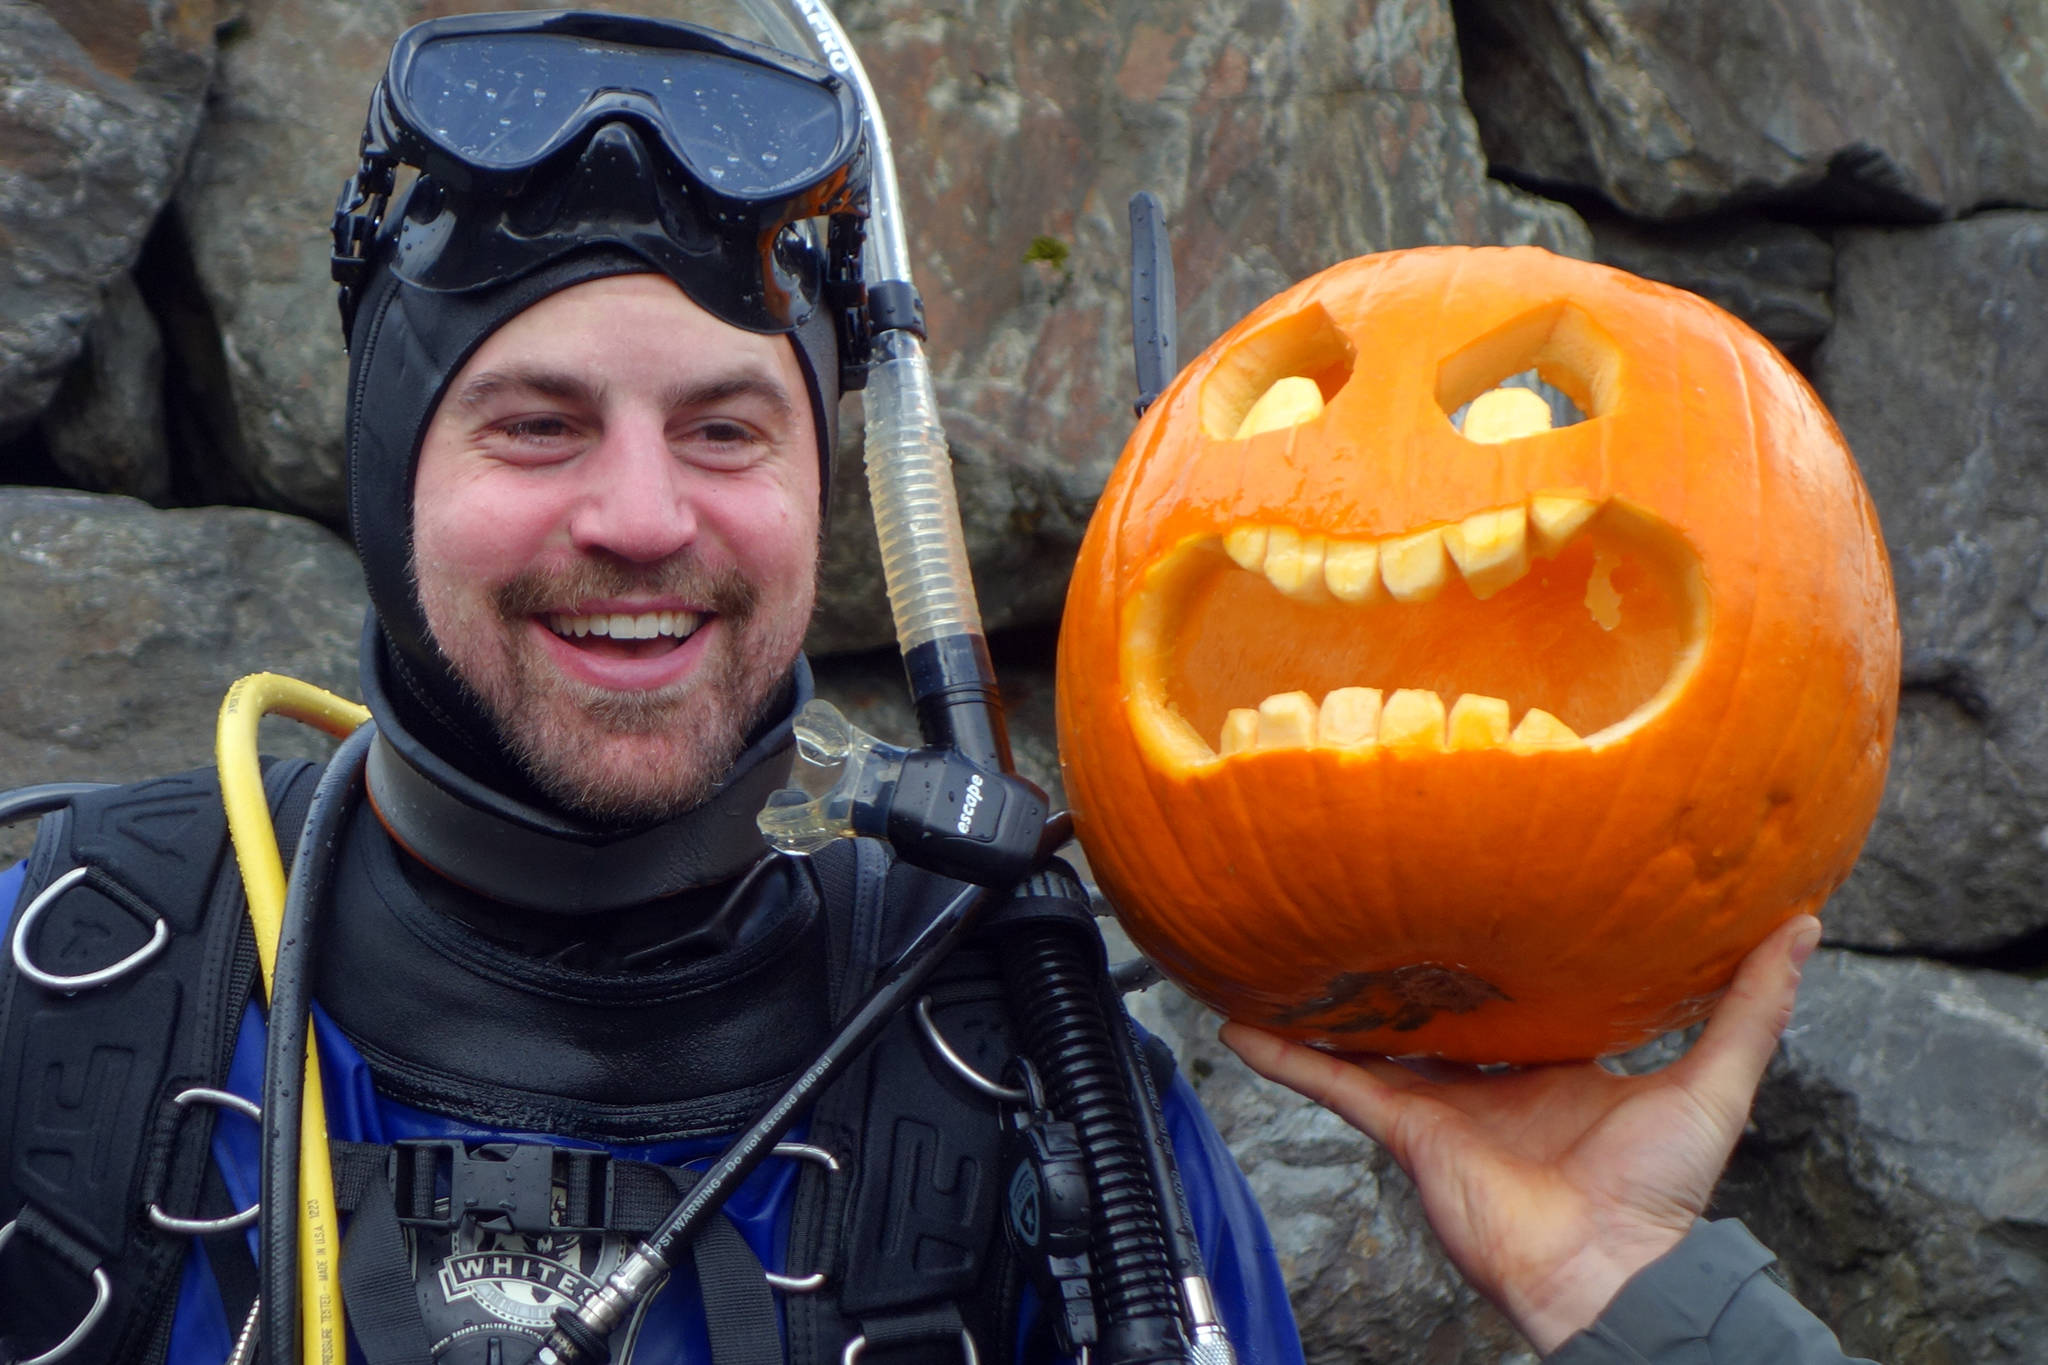 Darren Jaeckel smiles near a jack-o’-lantern he carved underwater at the Sixth Annual Spooktacular Dive and Underwater Pumpkin Carving event Saturday, Oct. 26, 2019. (Ben Hohenstatt | Juneau Empire)